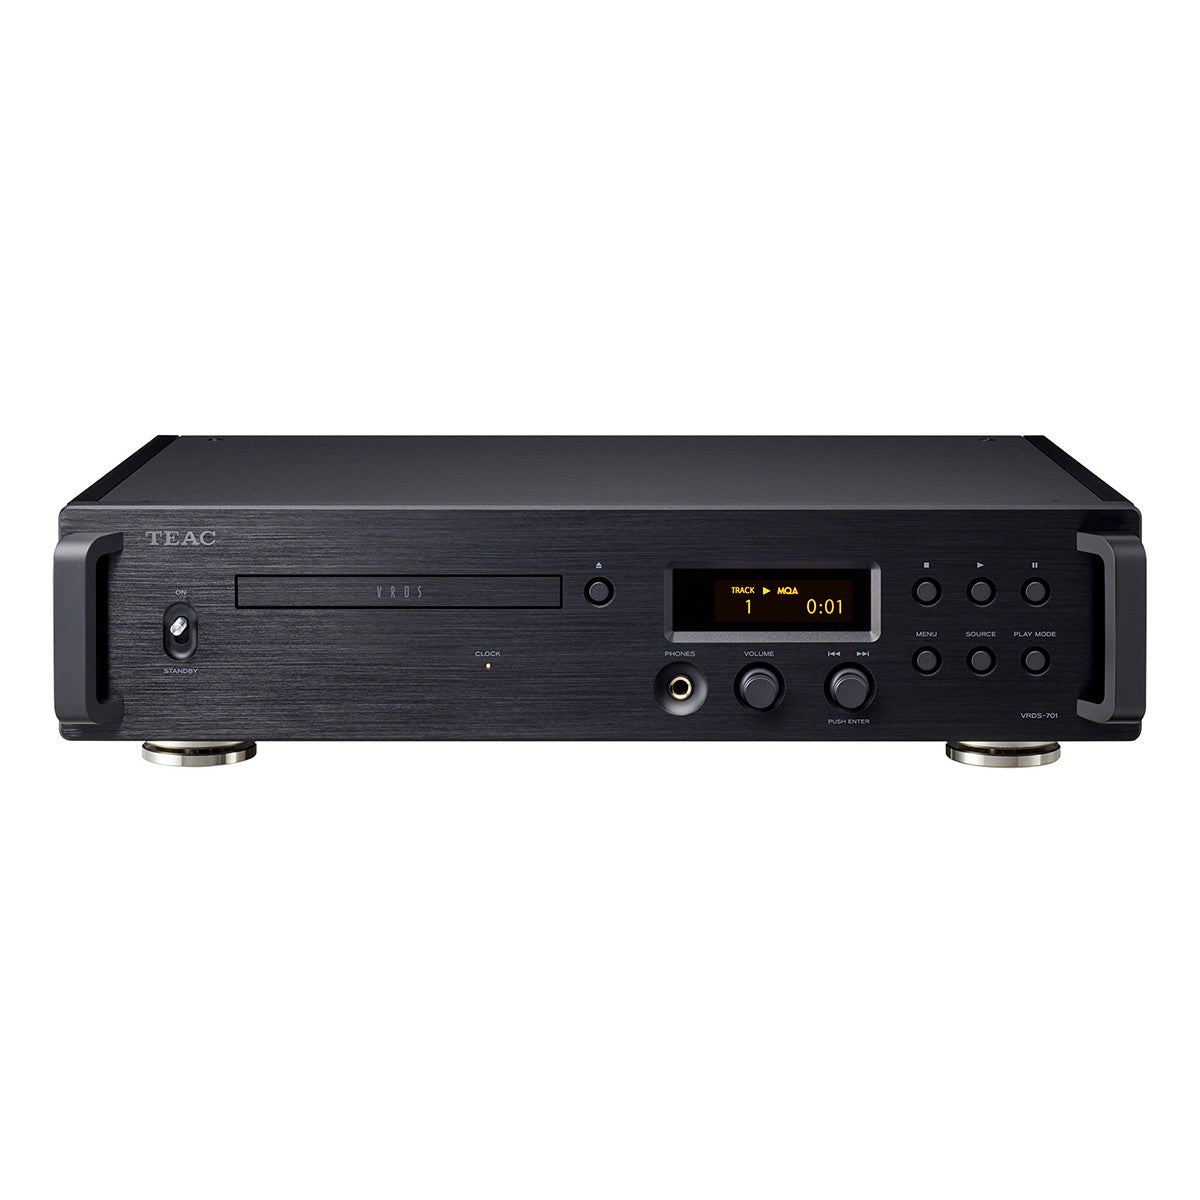 TEAC VRDS-701 Fully-Balanced CD Player with Preamplifier, 32-bit Discrete DAC, and Headphone Amplifier